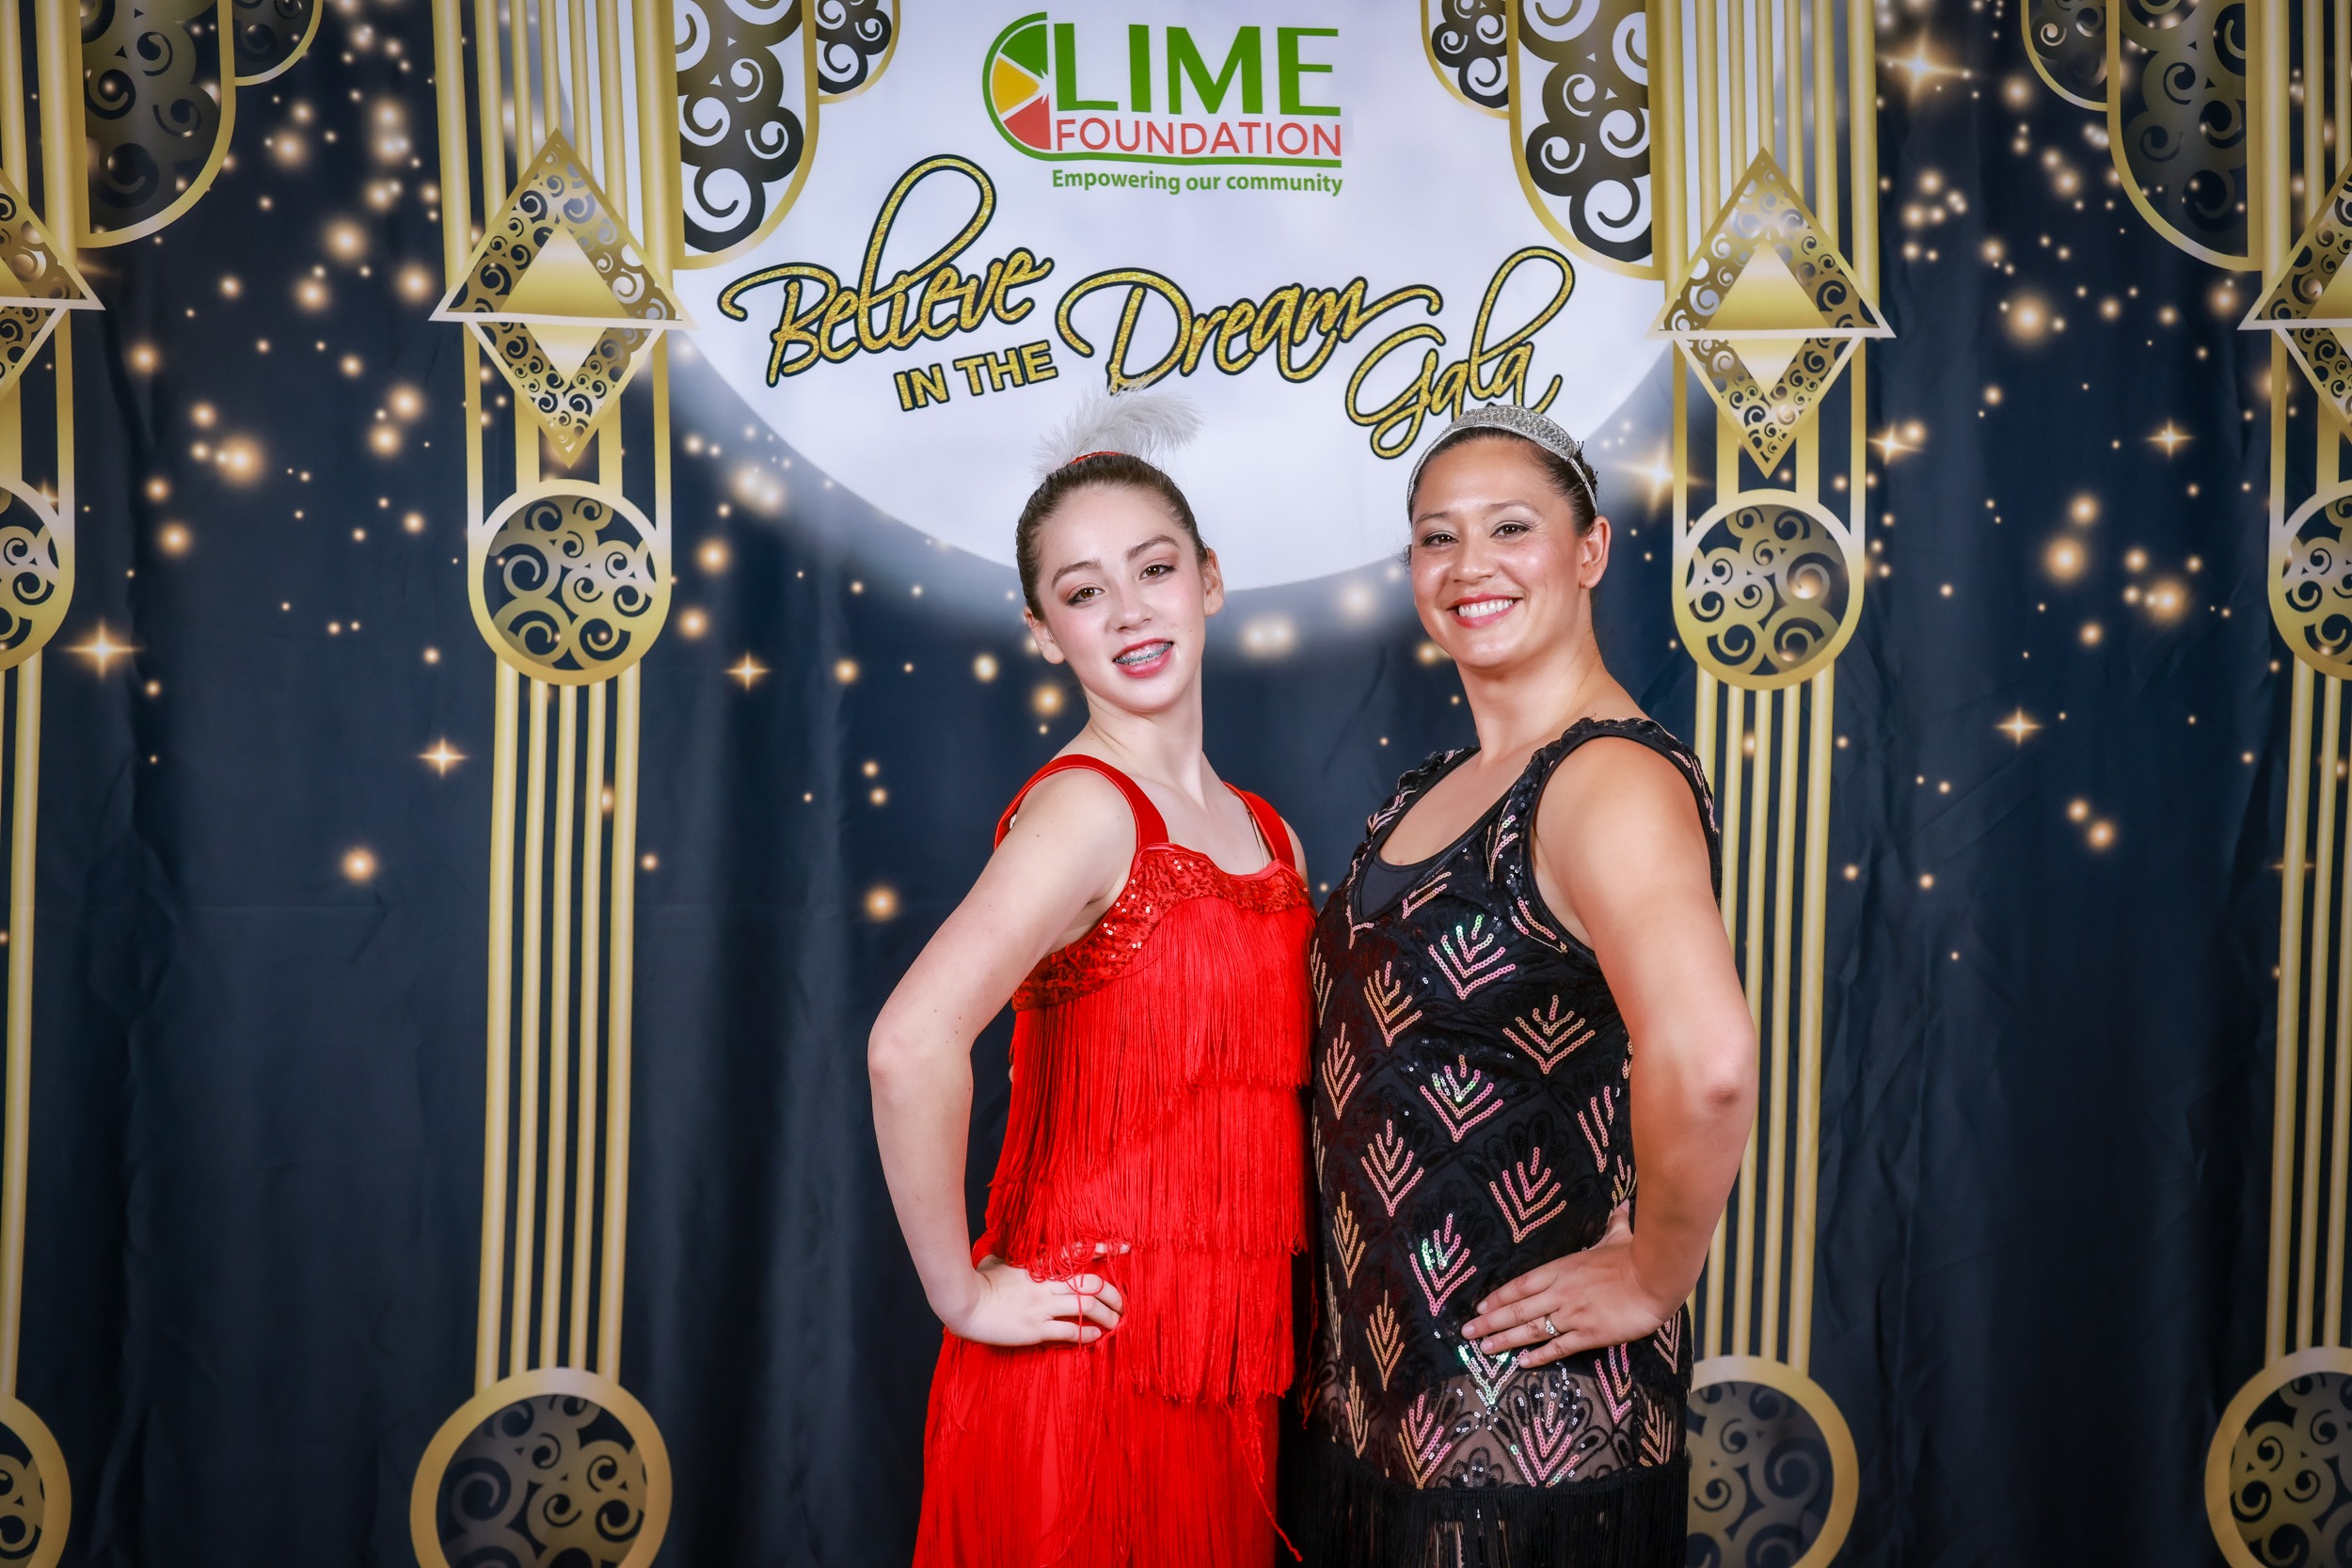 Two women pose for a photo in front of a gilded backdrop at the LIME Foundation event.